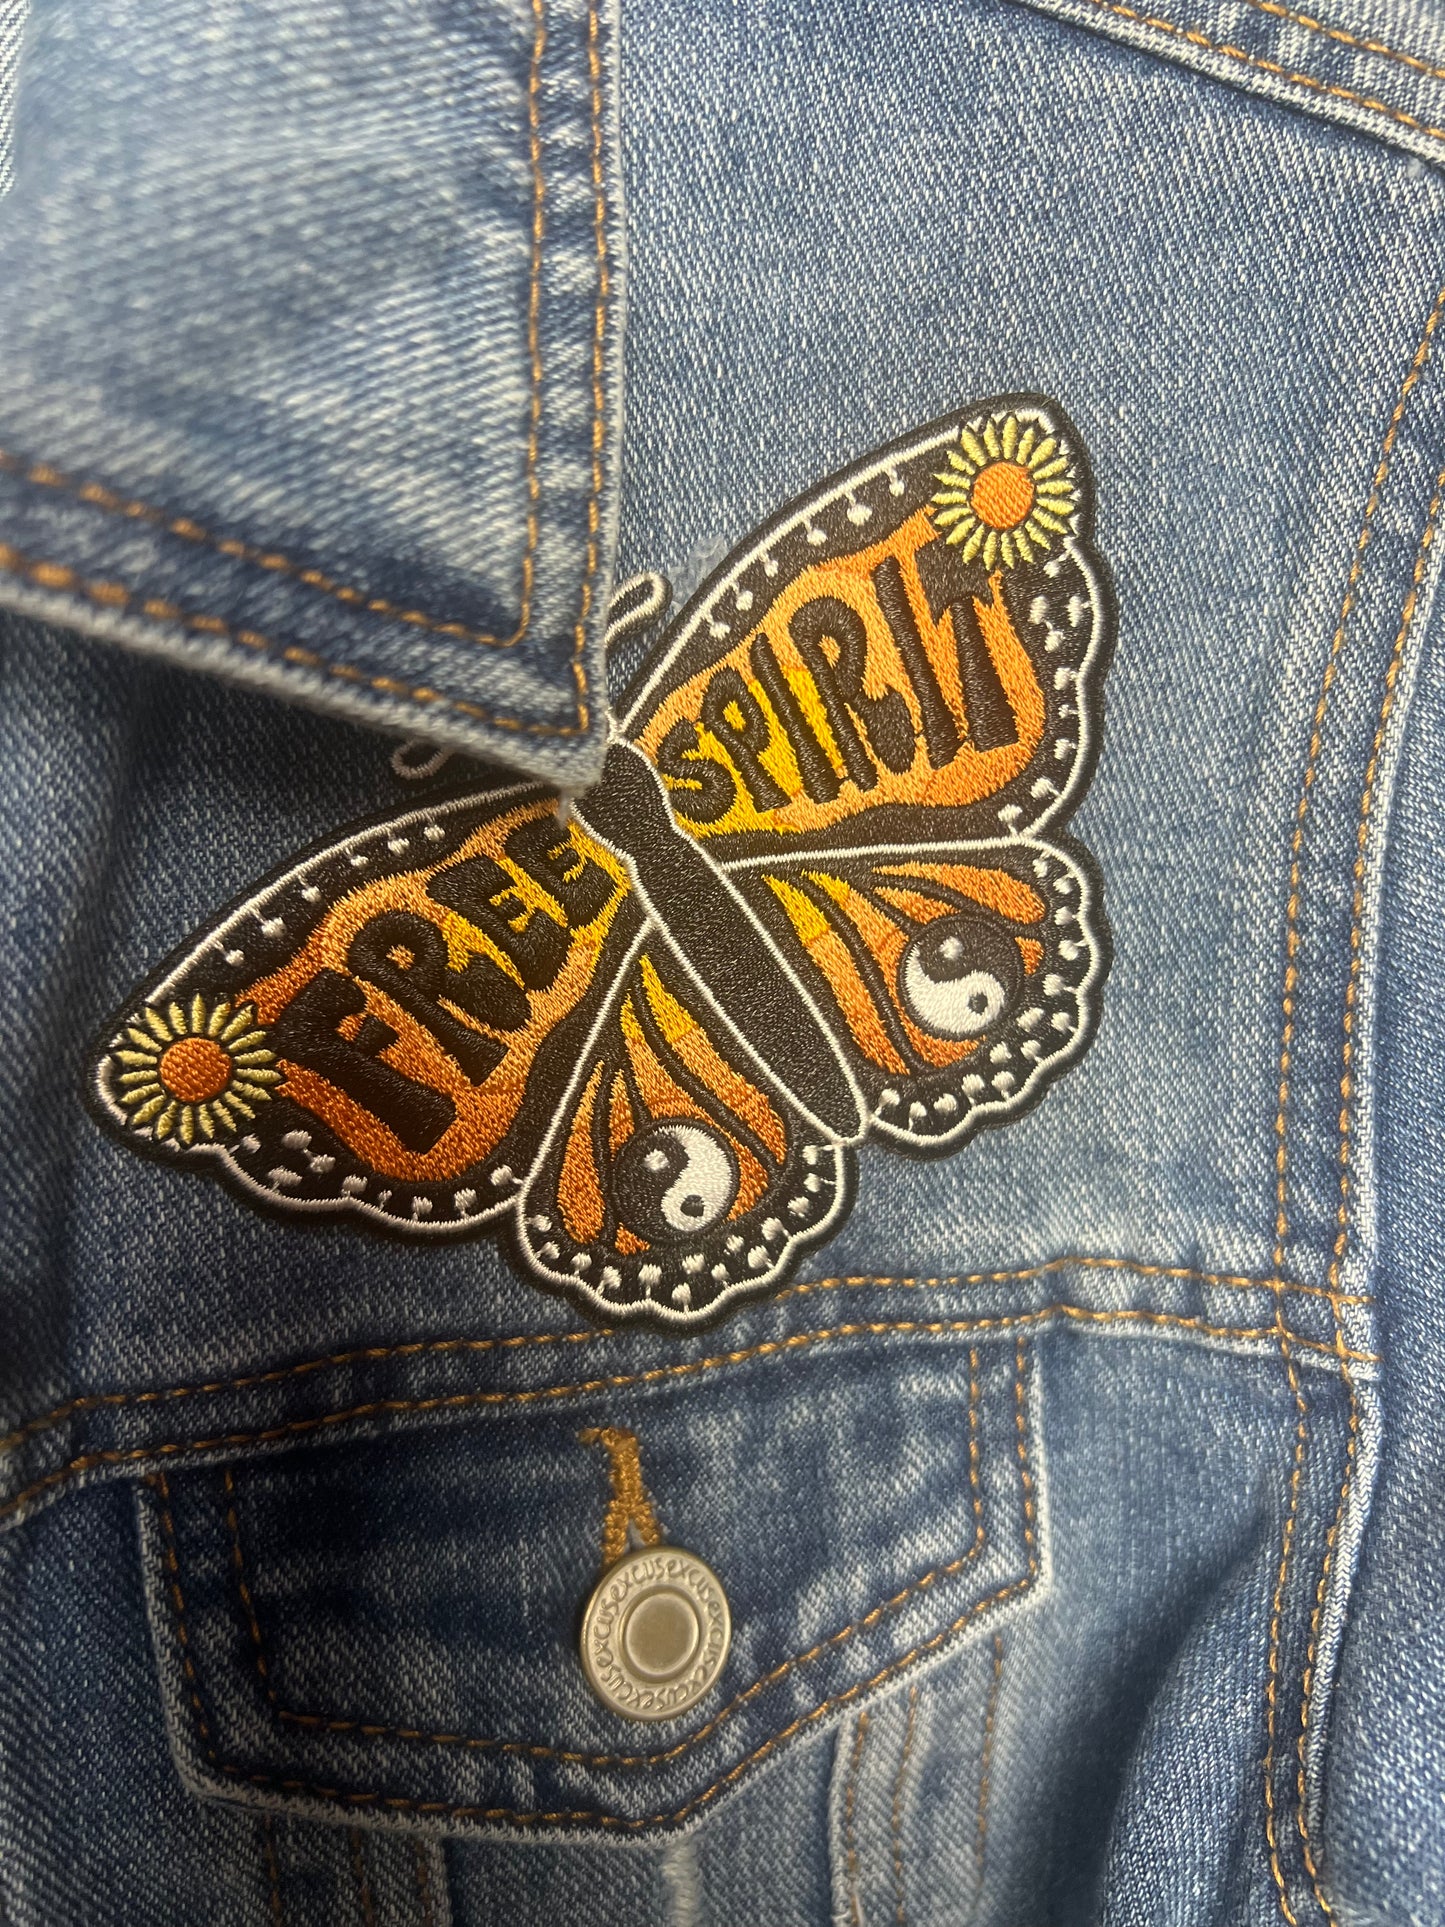 Free Spirit Butterfly Patch